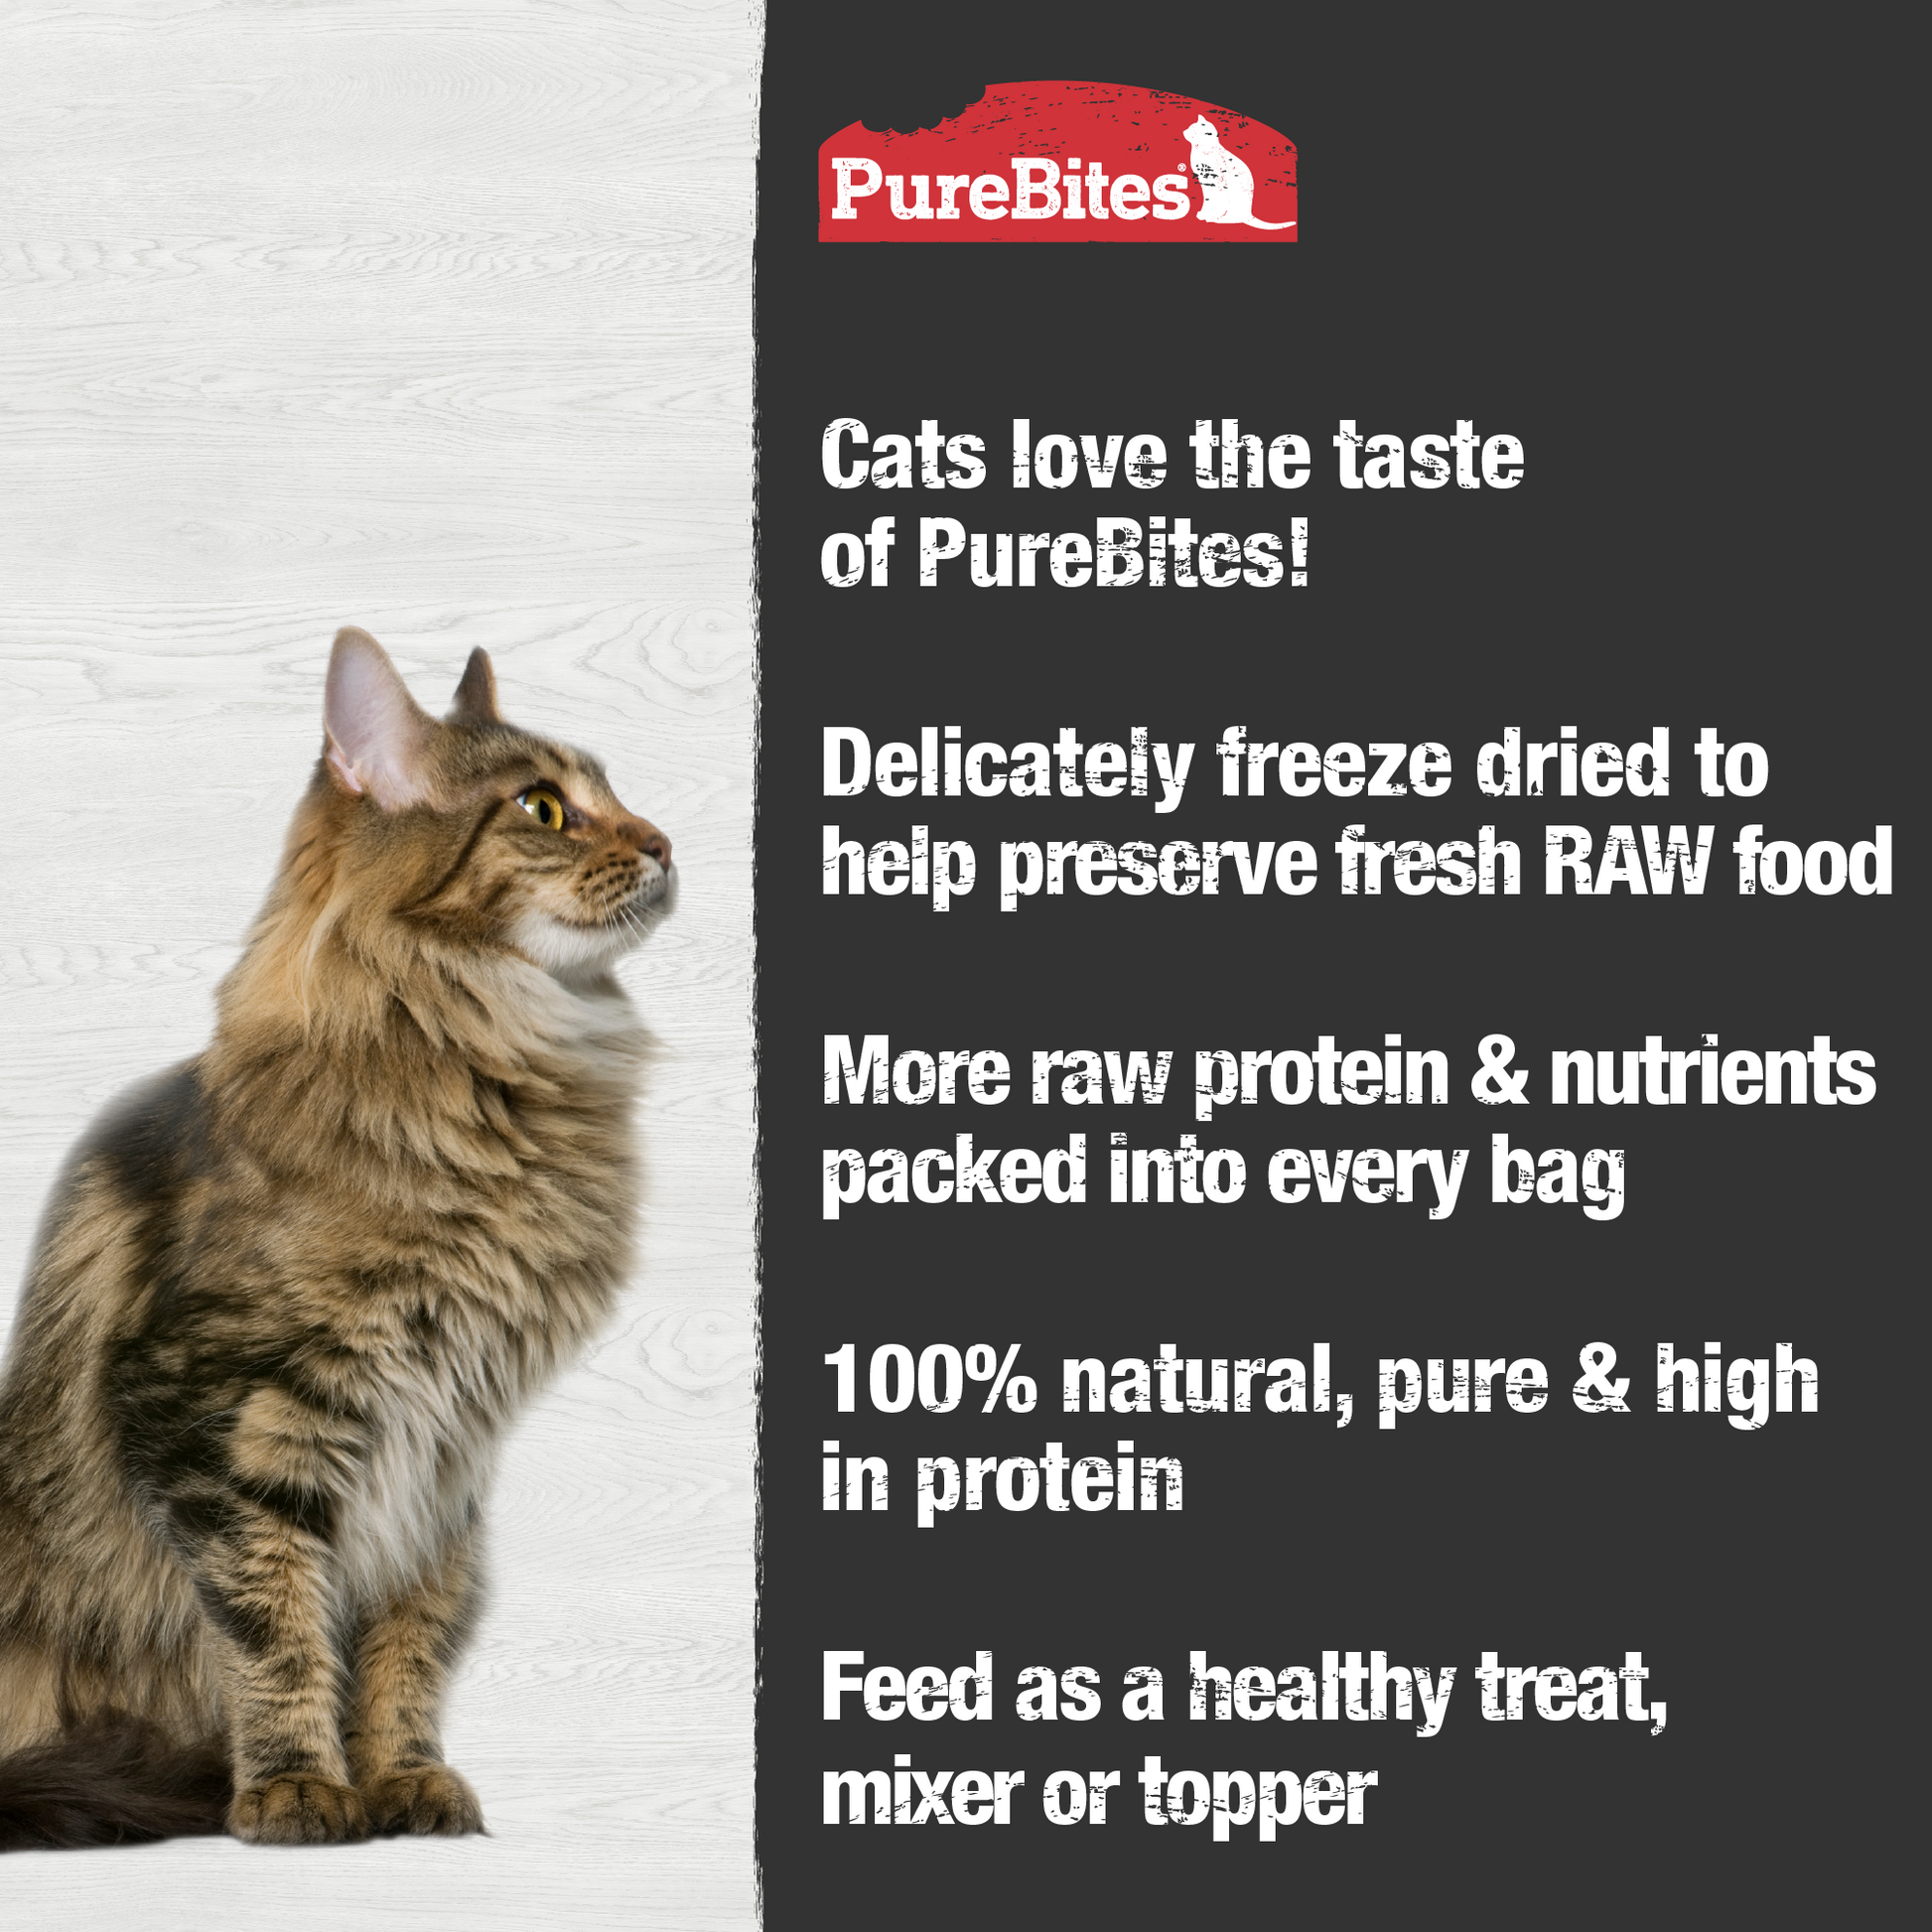 Made fresh & pure means more RAW protein and nutrients packed into every bag. Our chicken breast  is freeze dried to help preserve its RAW taste, and nutrition, and mirror a cat’s ancestral diet